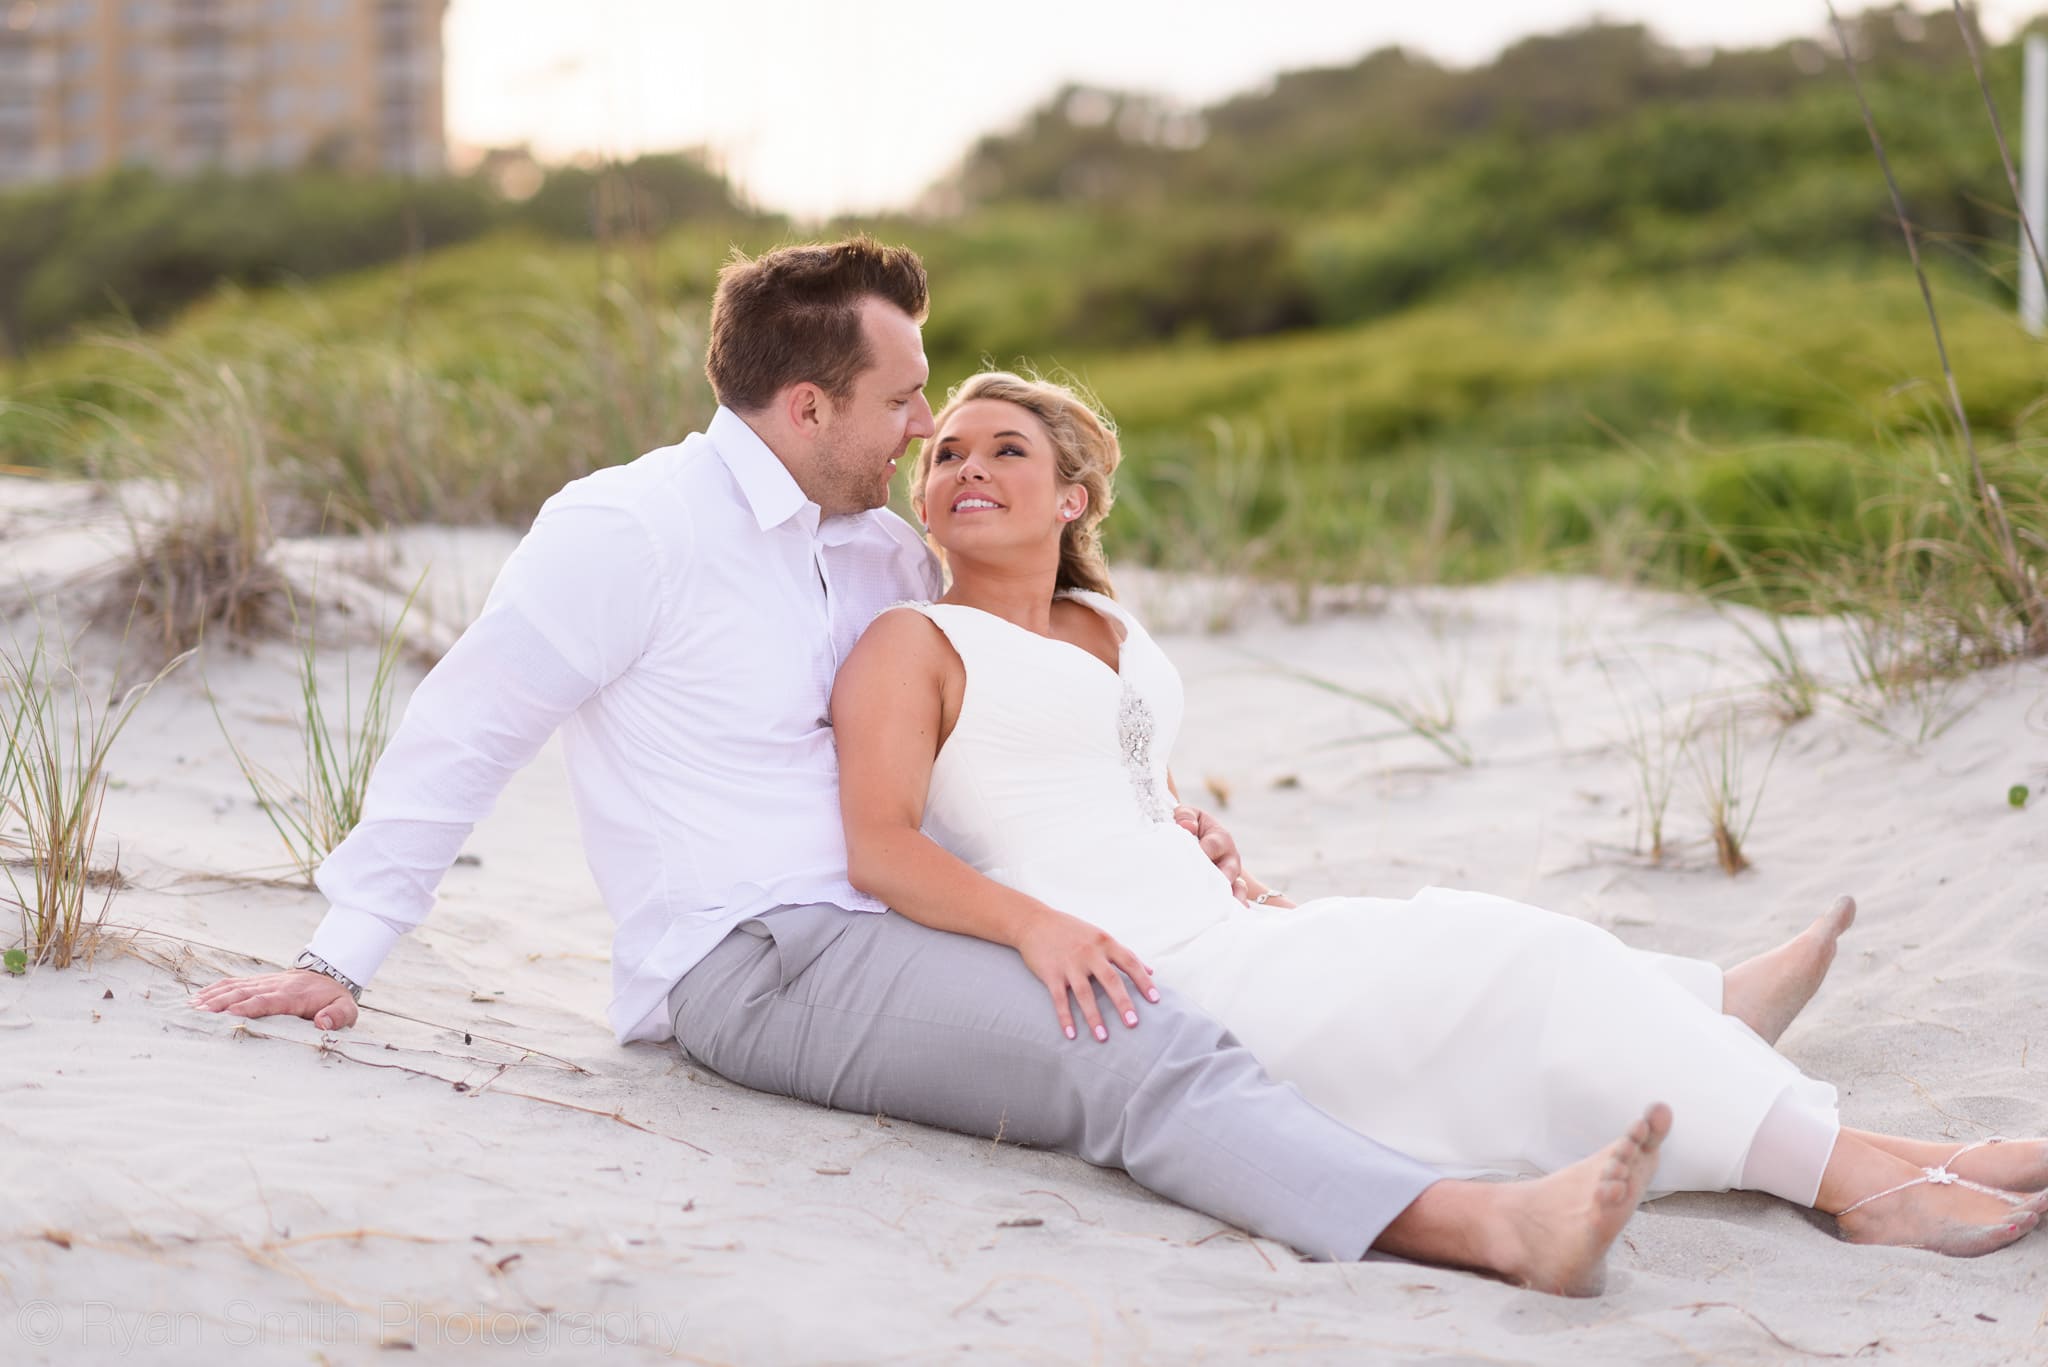 After wedding portraits by the dunes on the beach - Grande Dunes Ocean Club